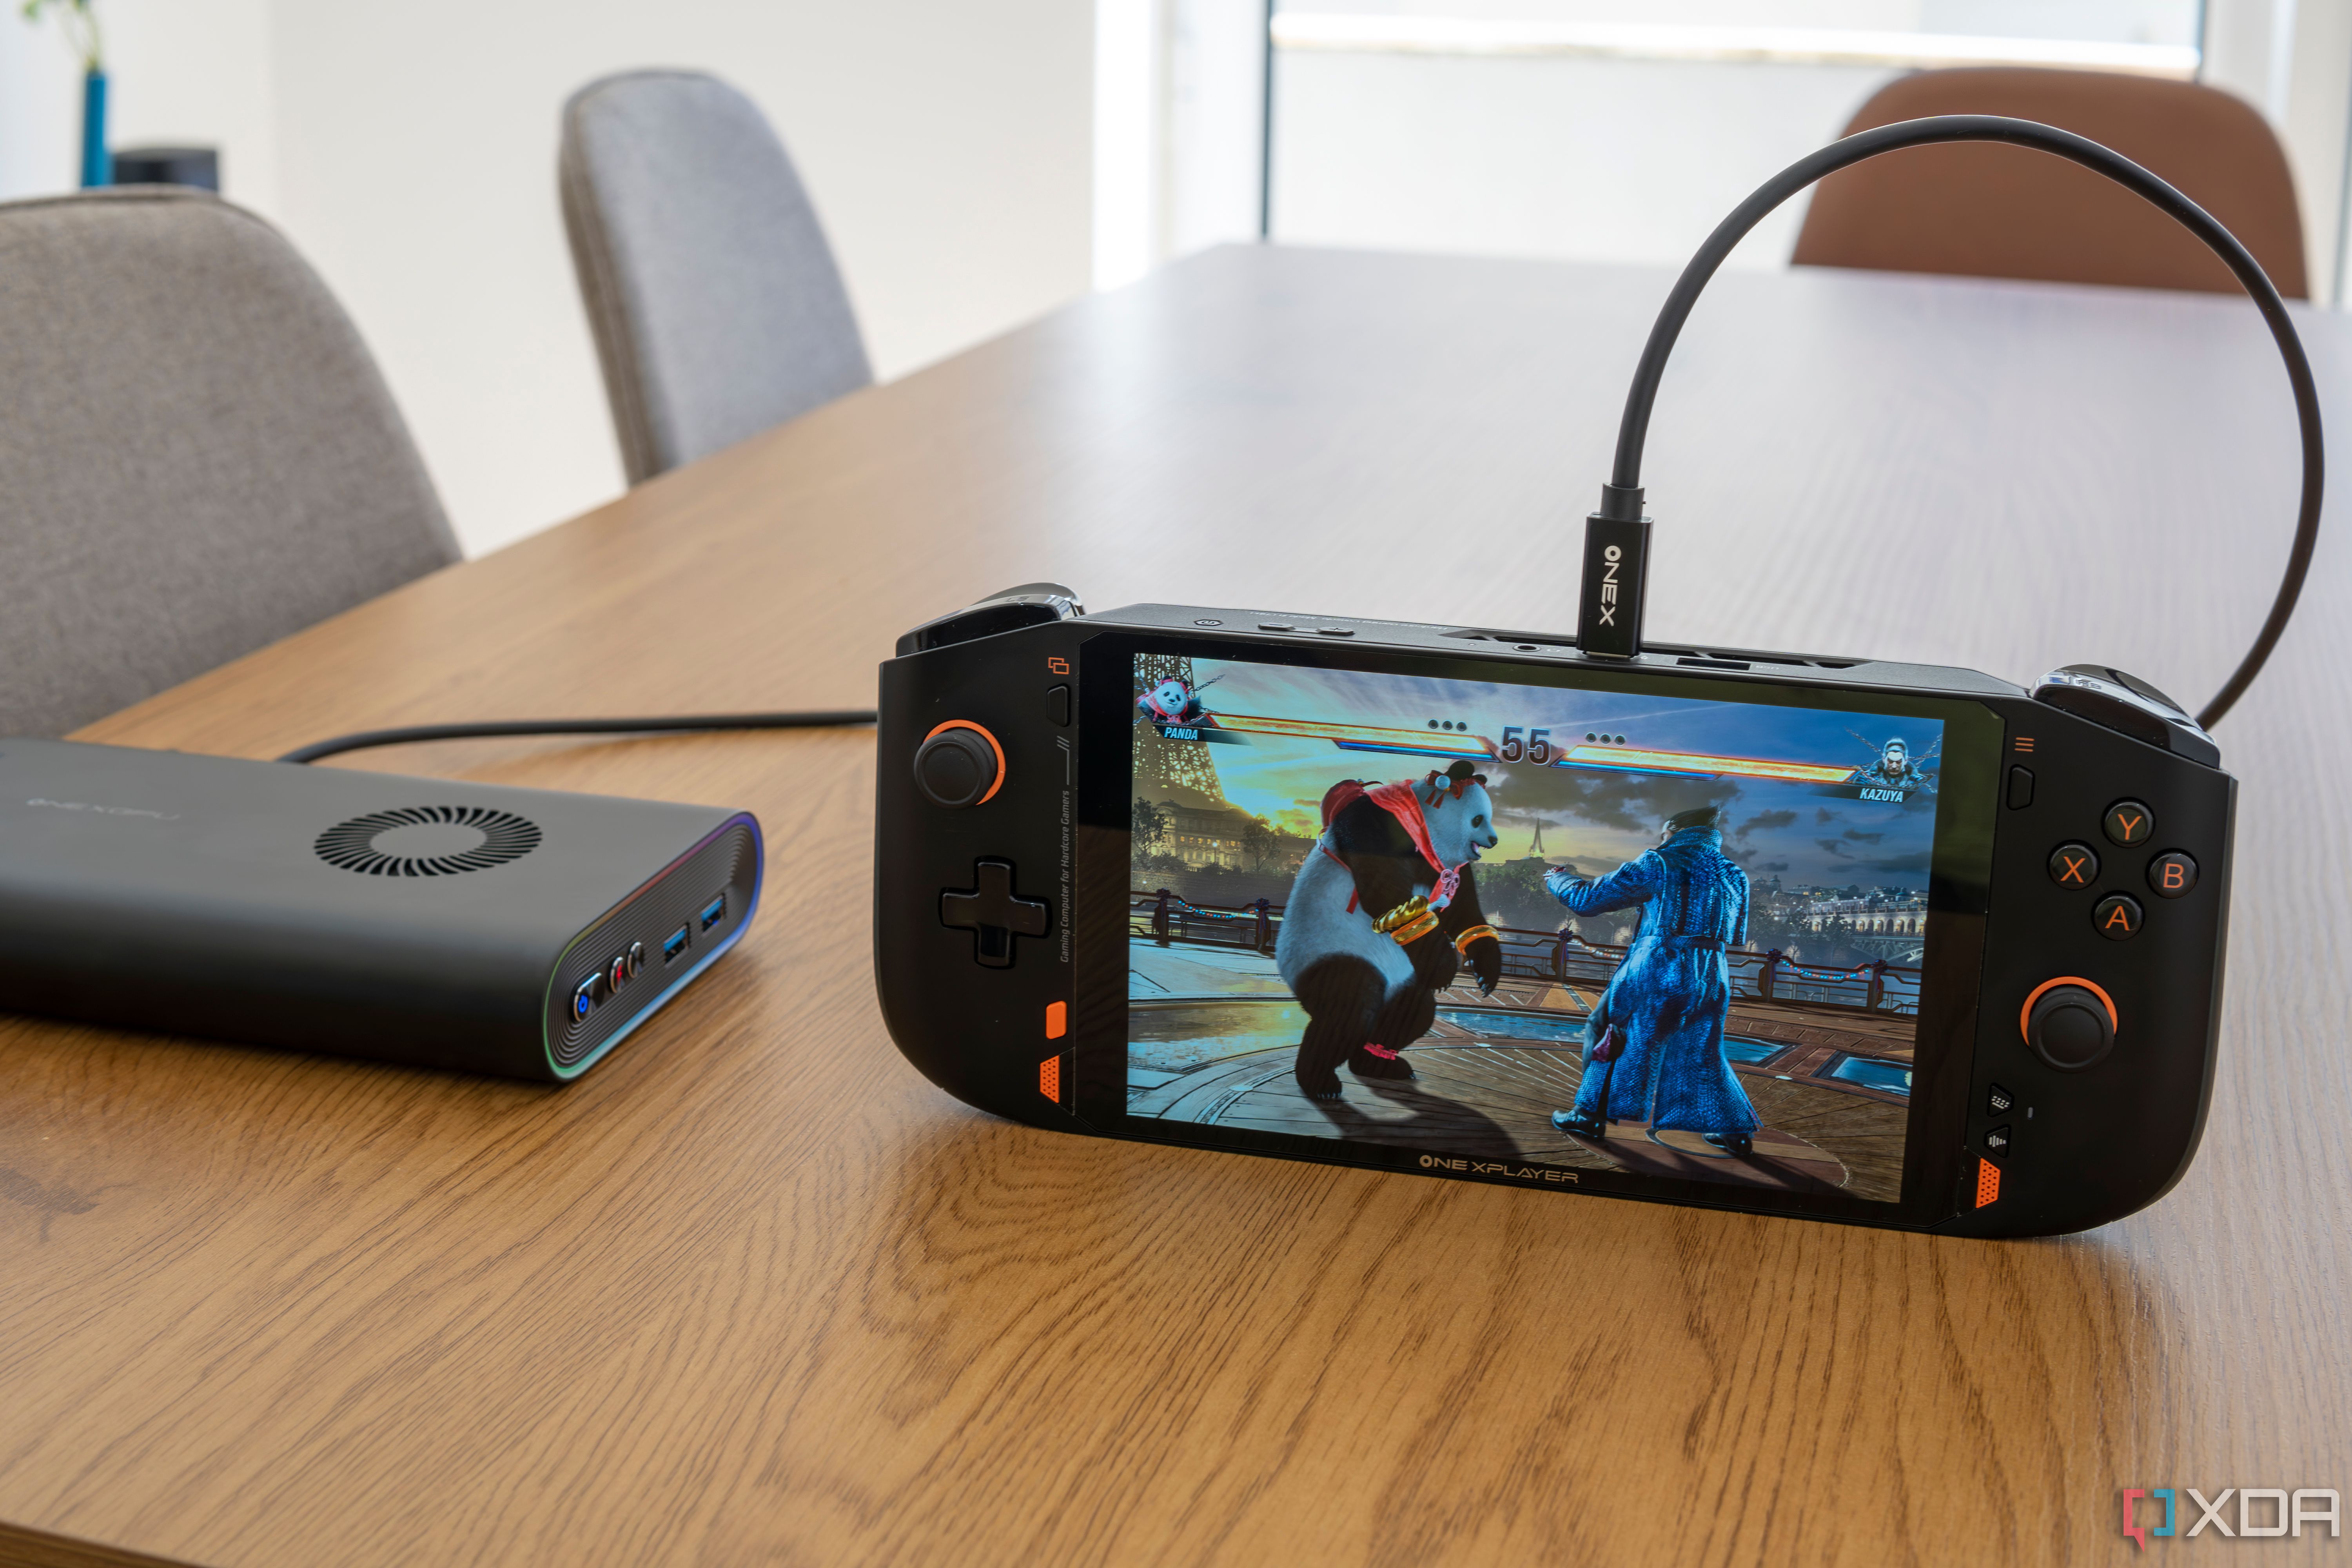 We tested gaming handhelds with external GPUs — here’s how it went